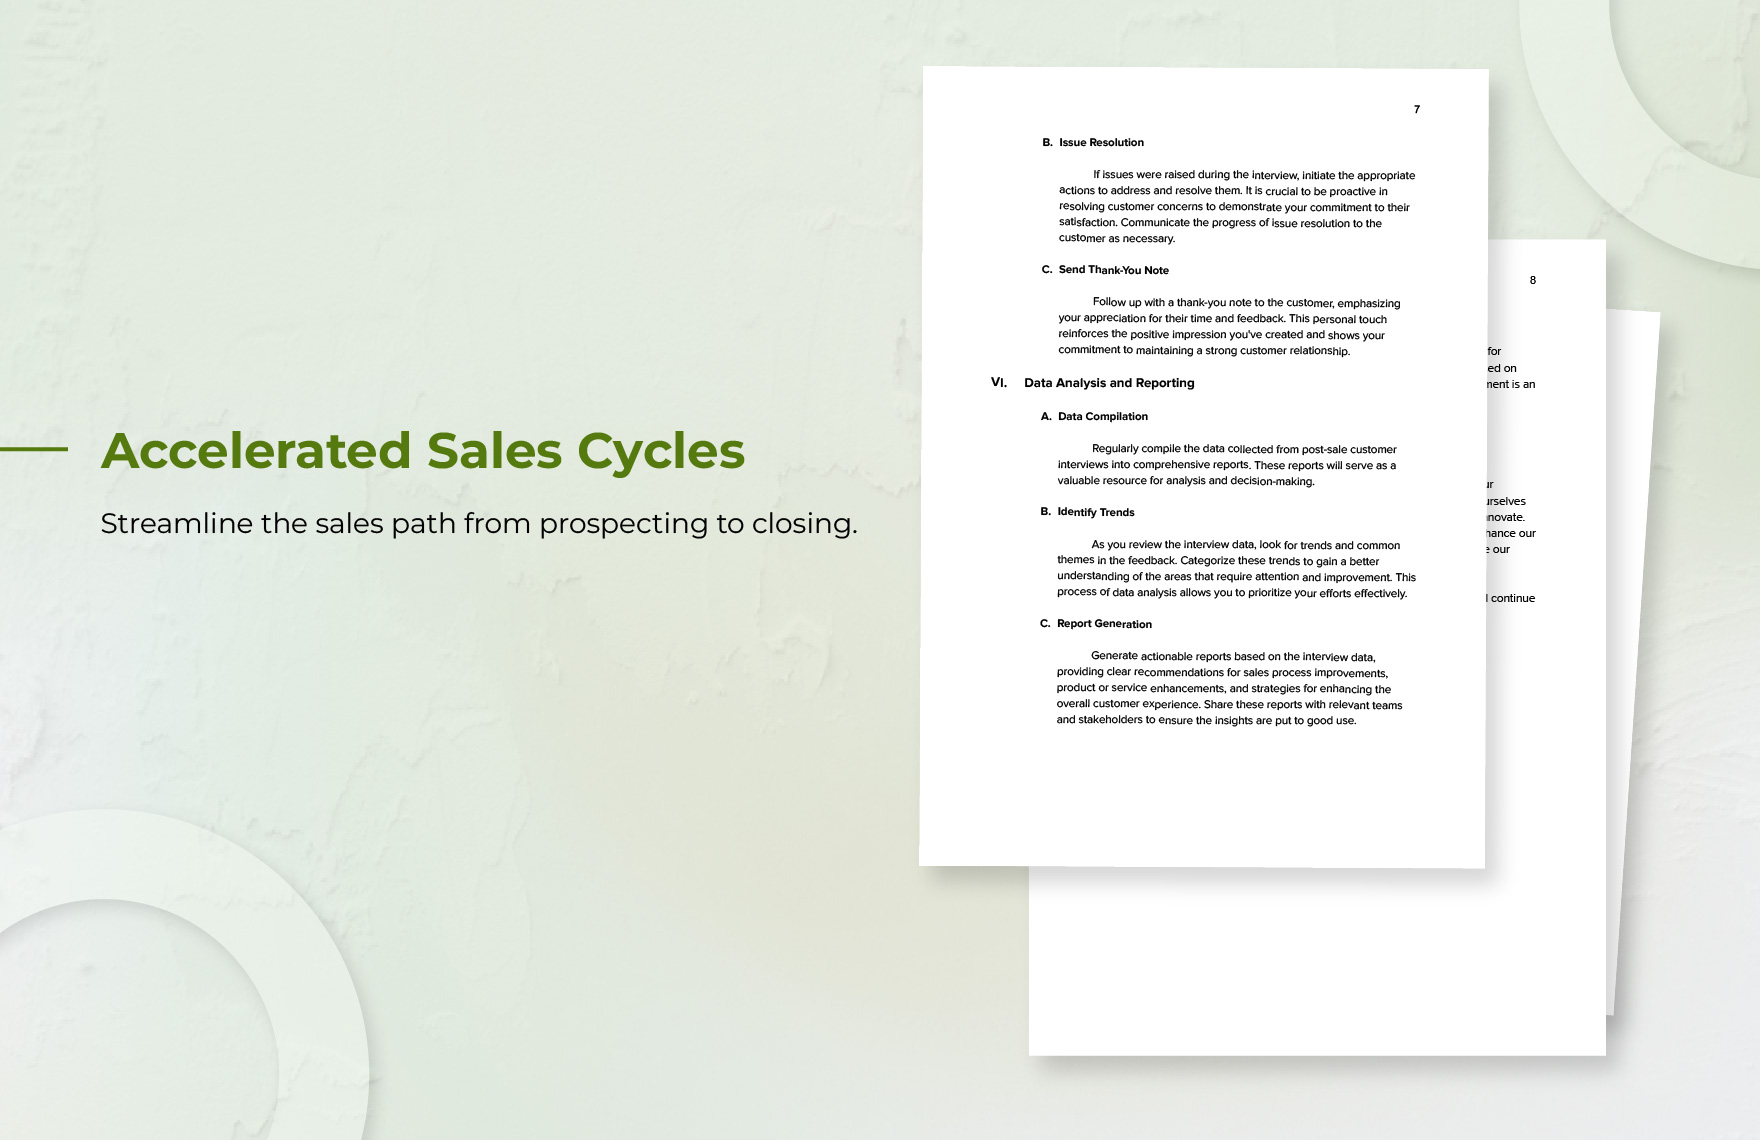 Guide for Conducting Post-Sale Customer Interviews Template